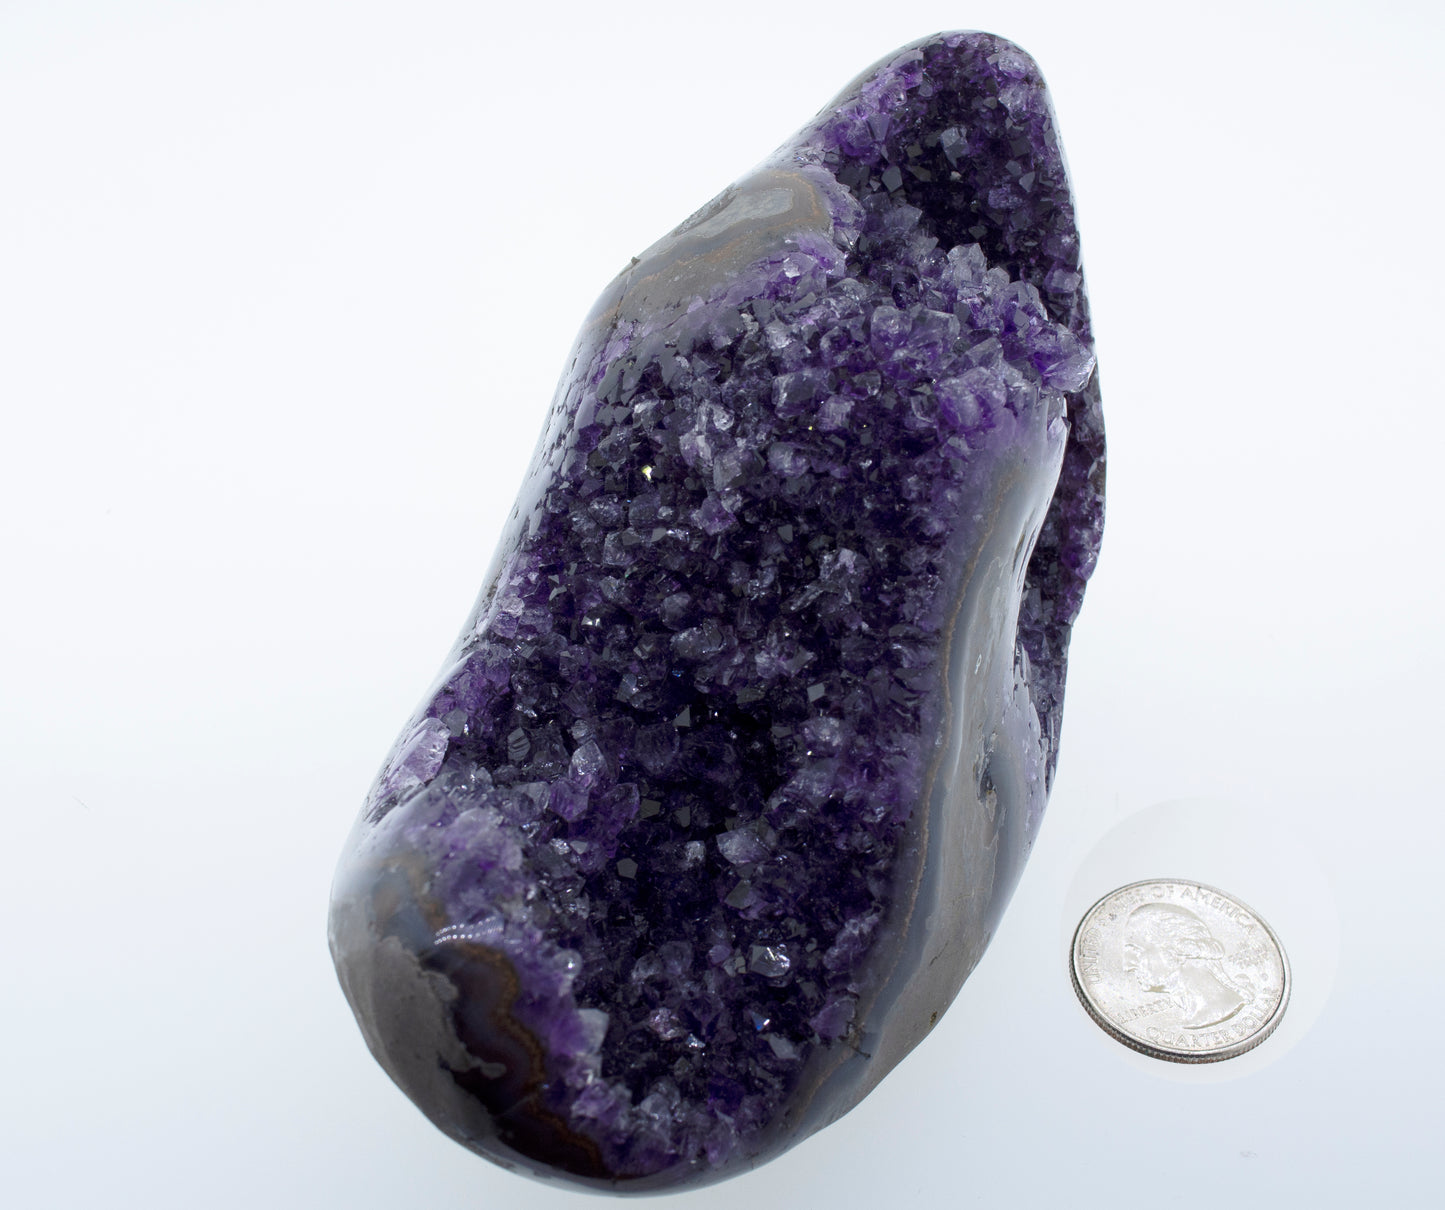 
                  
                    An Egg Shaped Amethyst Geode with a purple amethyst rock next to a dime.
                  
                